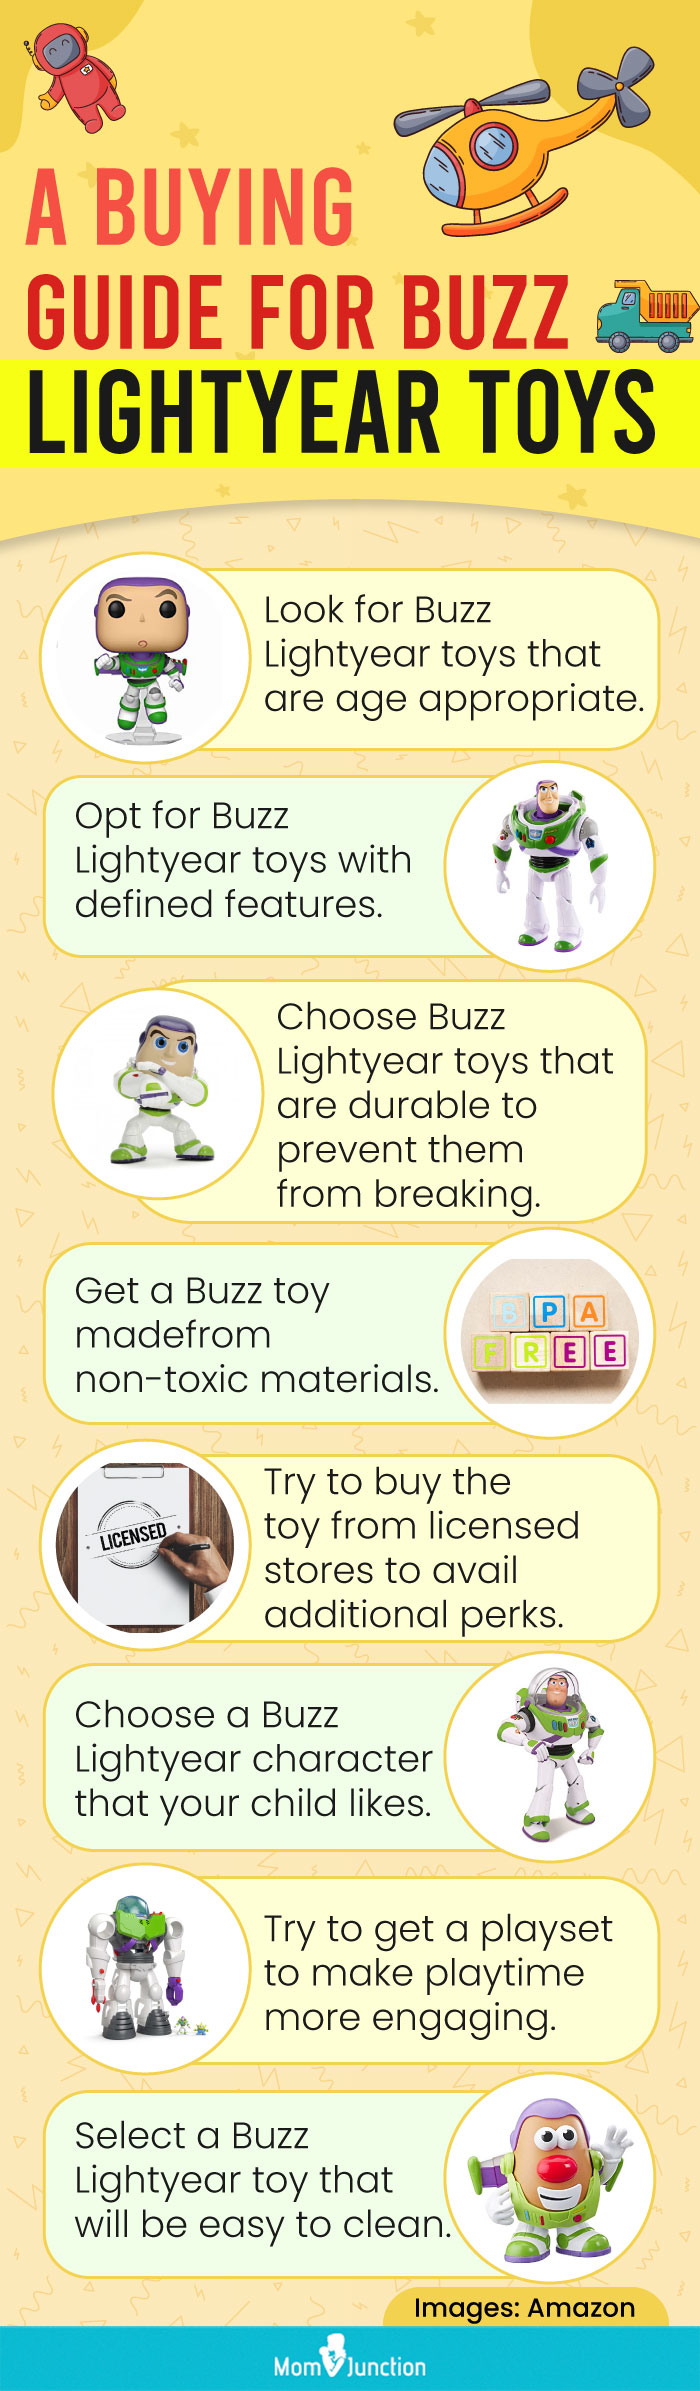 A Buying Guide For Buzz Lightyear Toys (infographic)